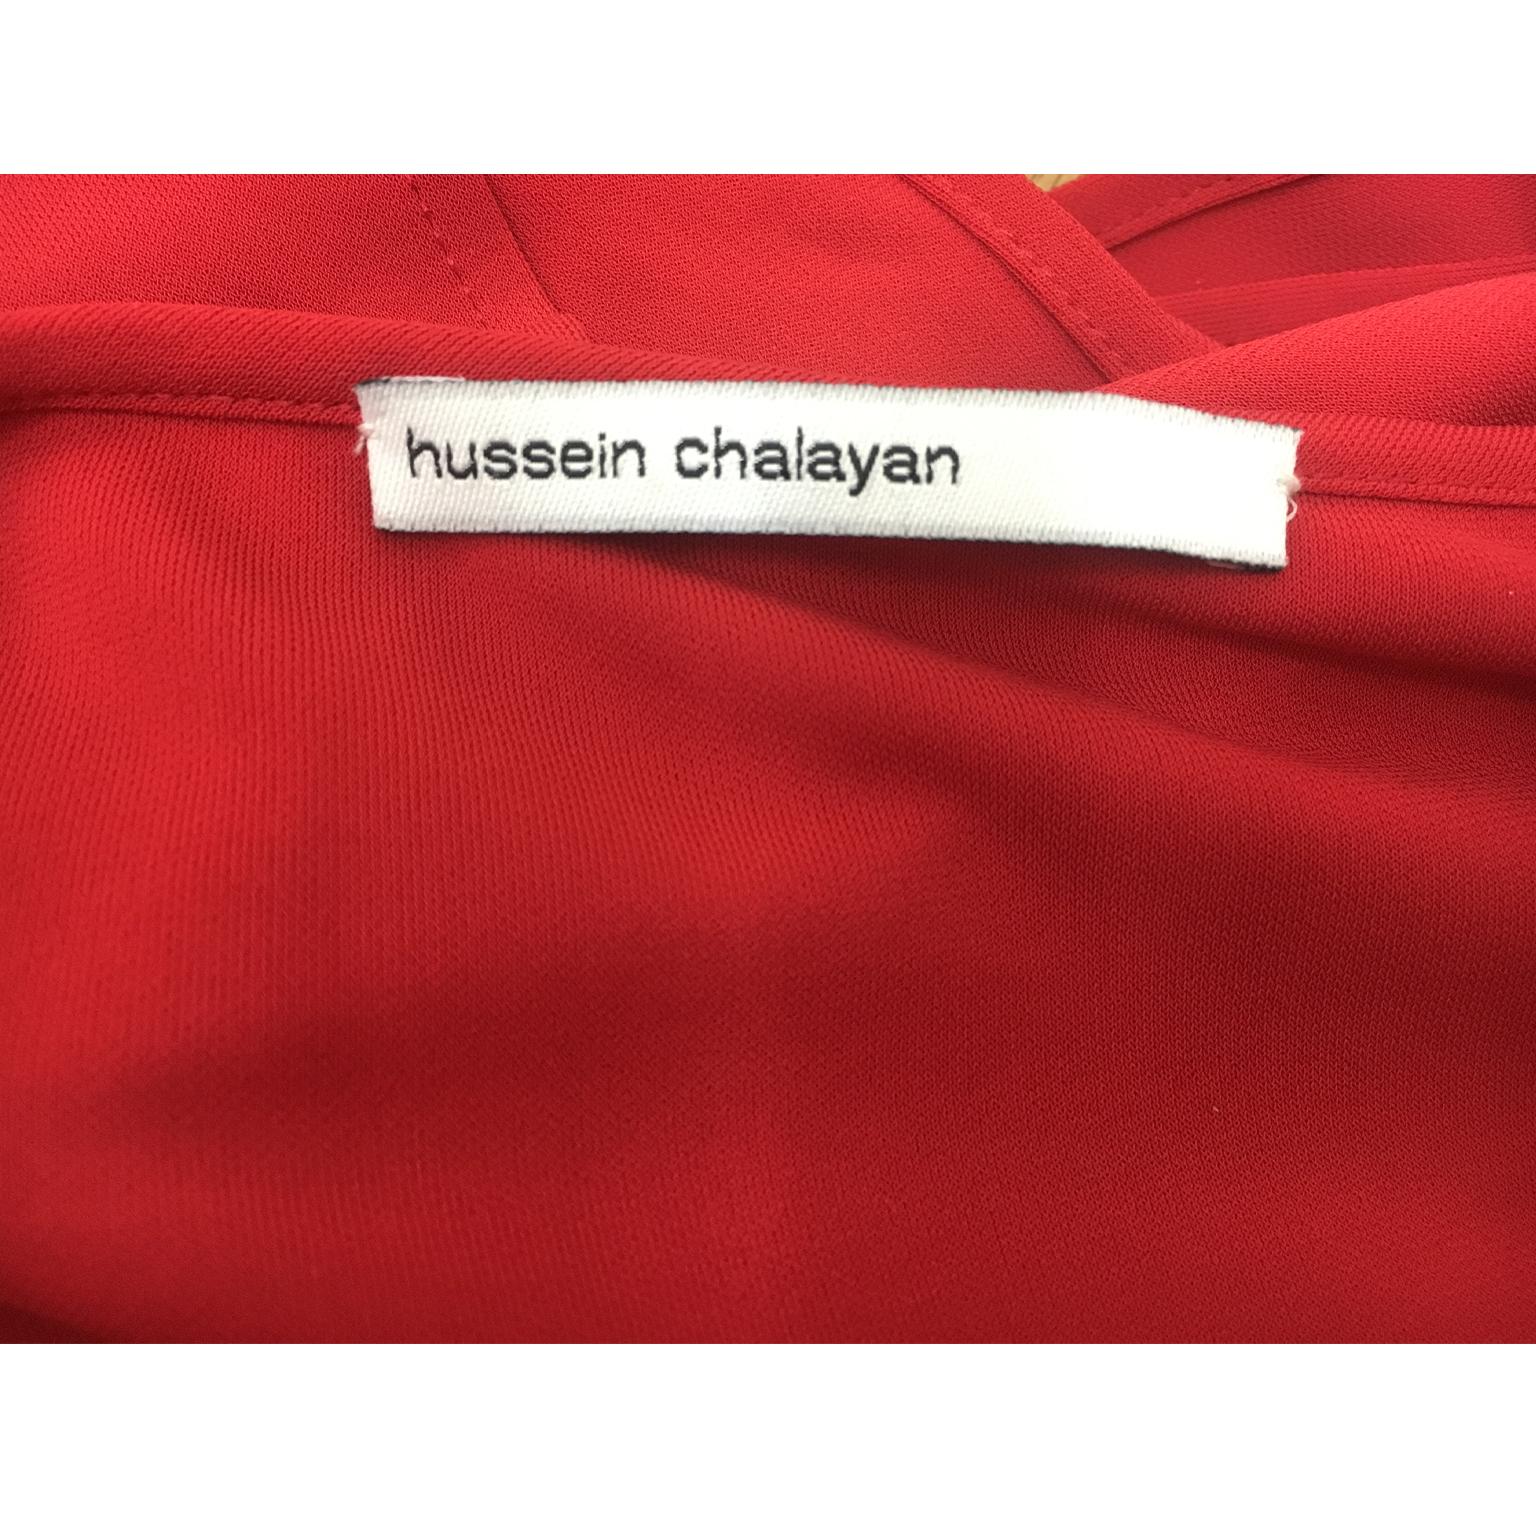 Women's or Men's Chalayan Red Dress Show Runway Piece Panoramic AW 1998 For Sale